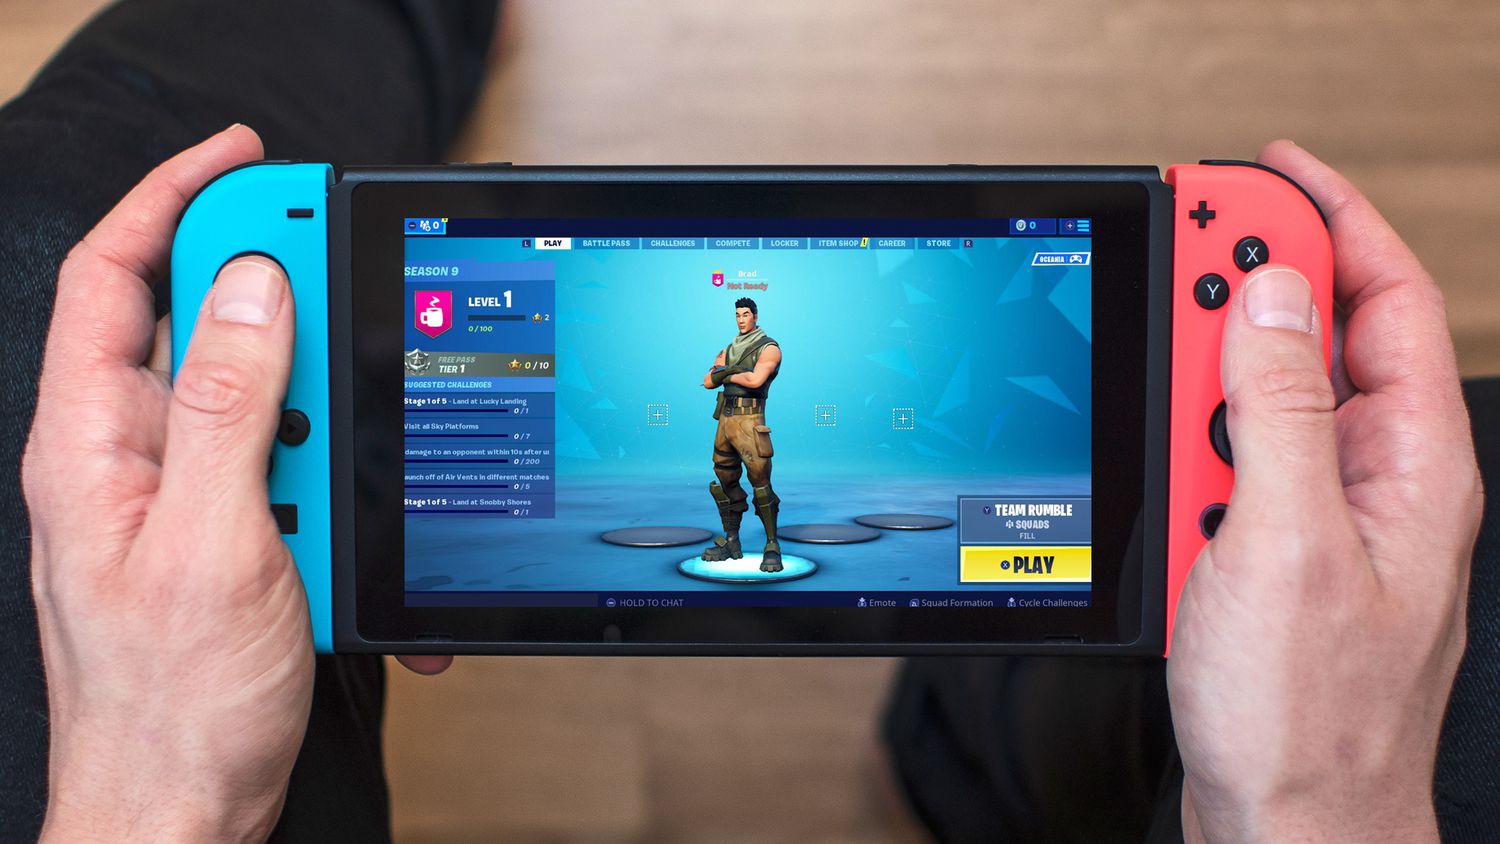 How to Change FORTNITE Name on PC, Mobile, and Consoles?